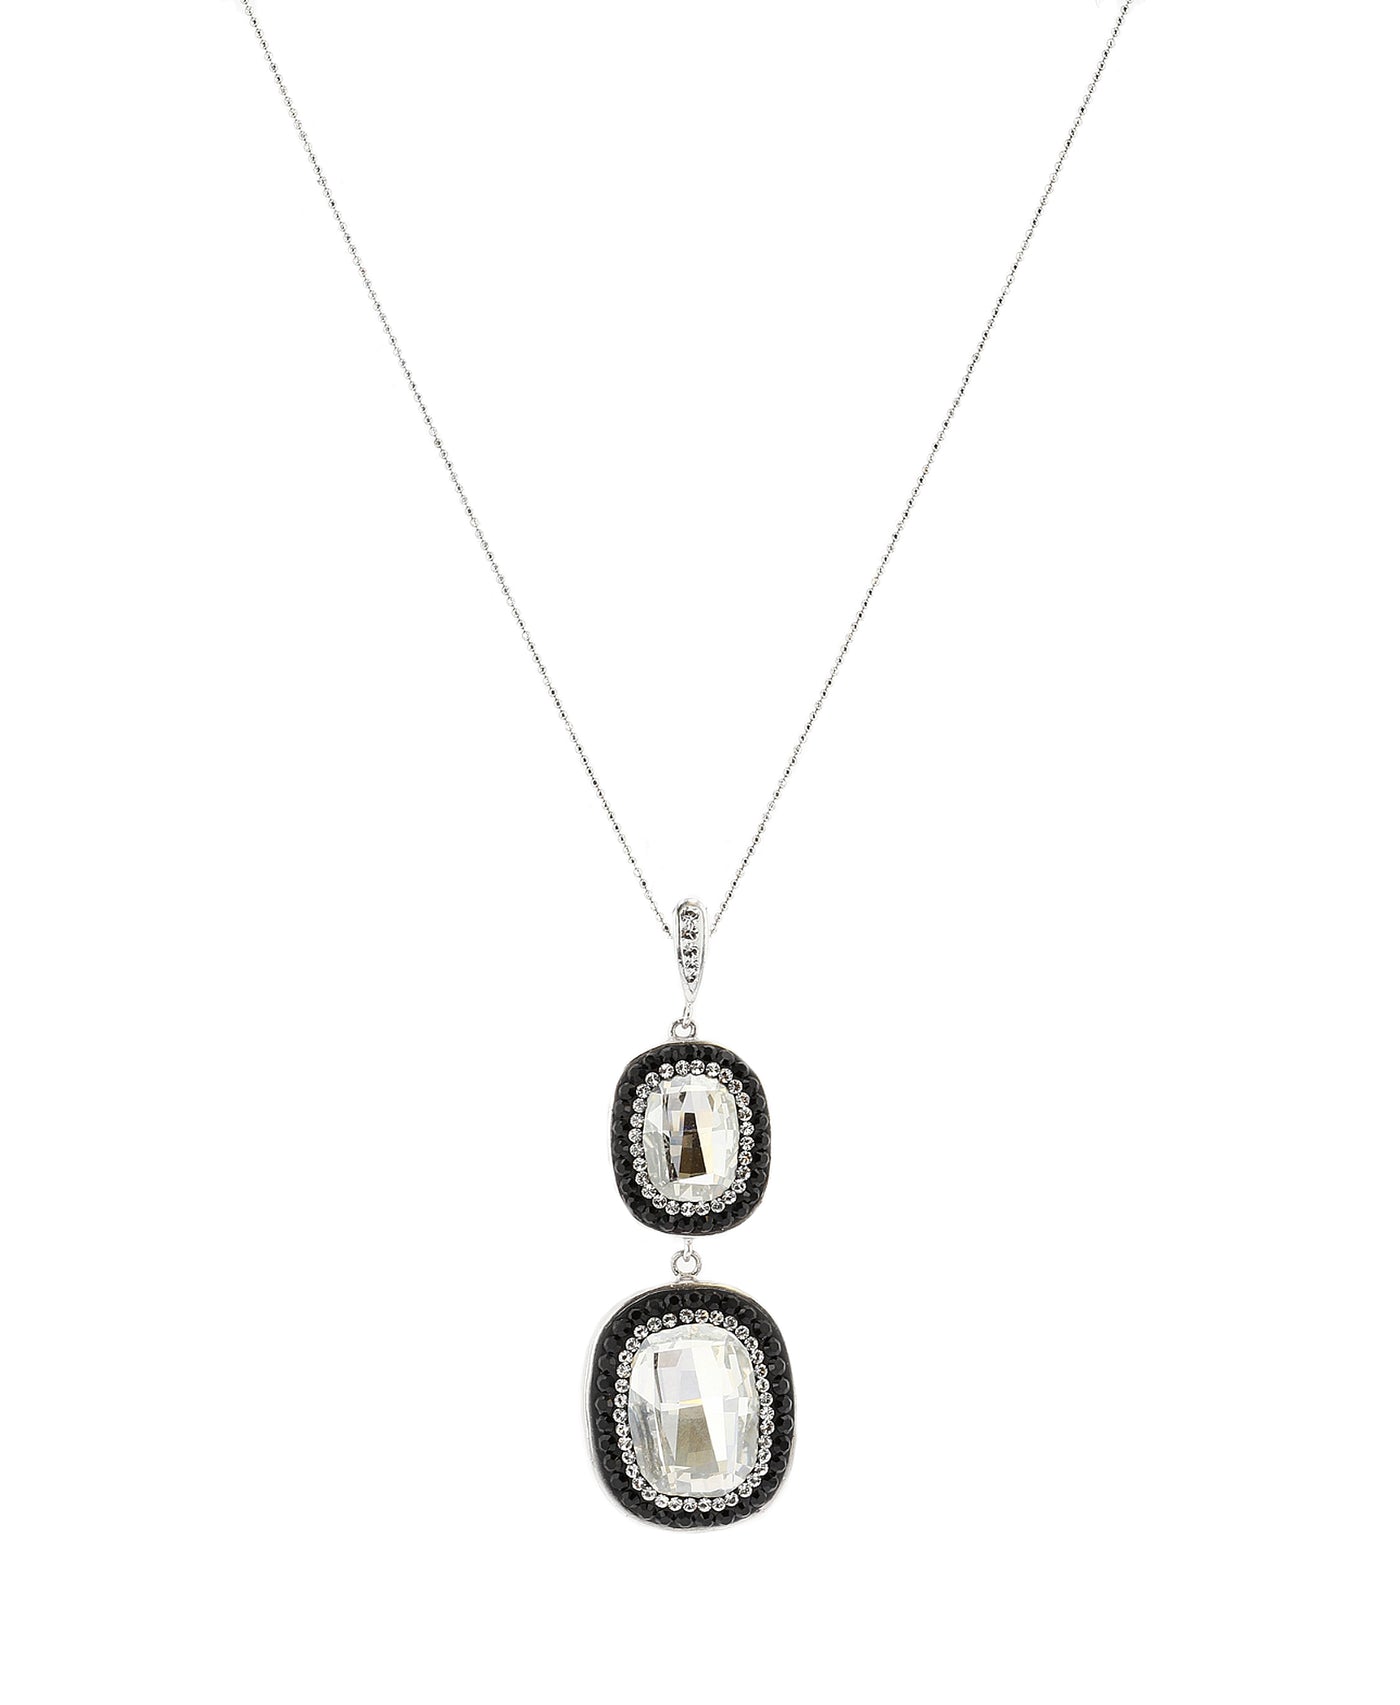 Double Genuine Crystal Pendant Necklace image 1